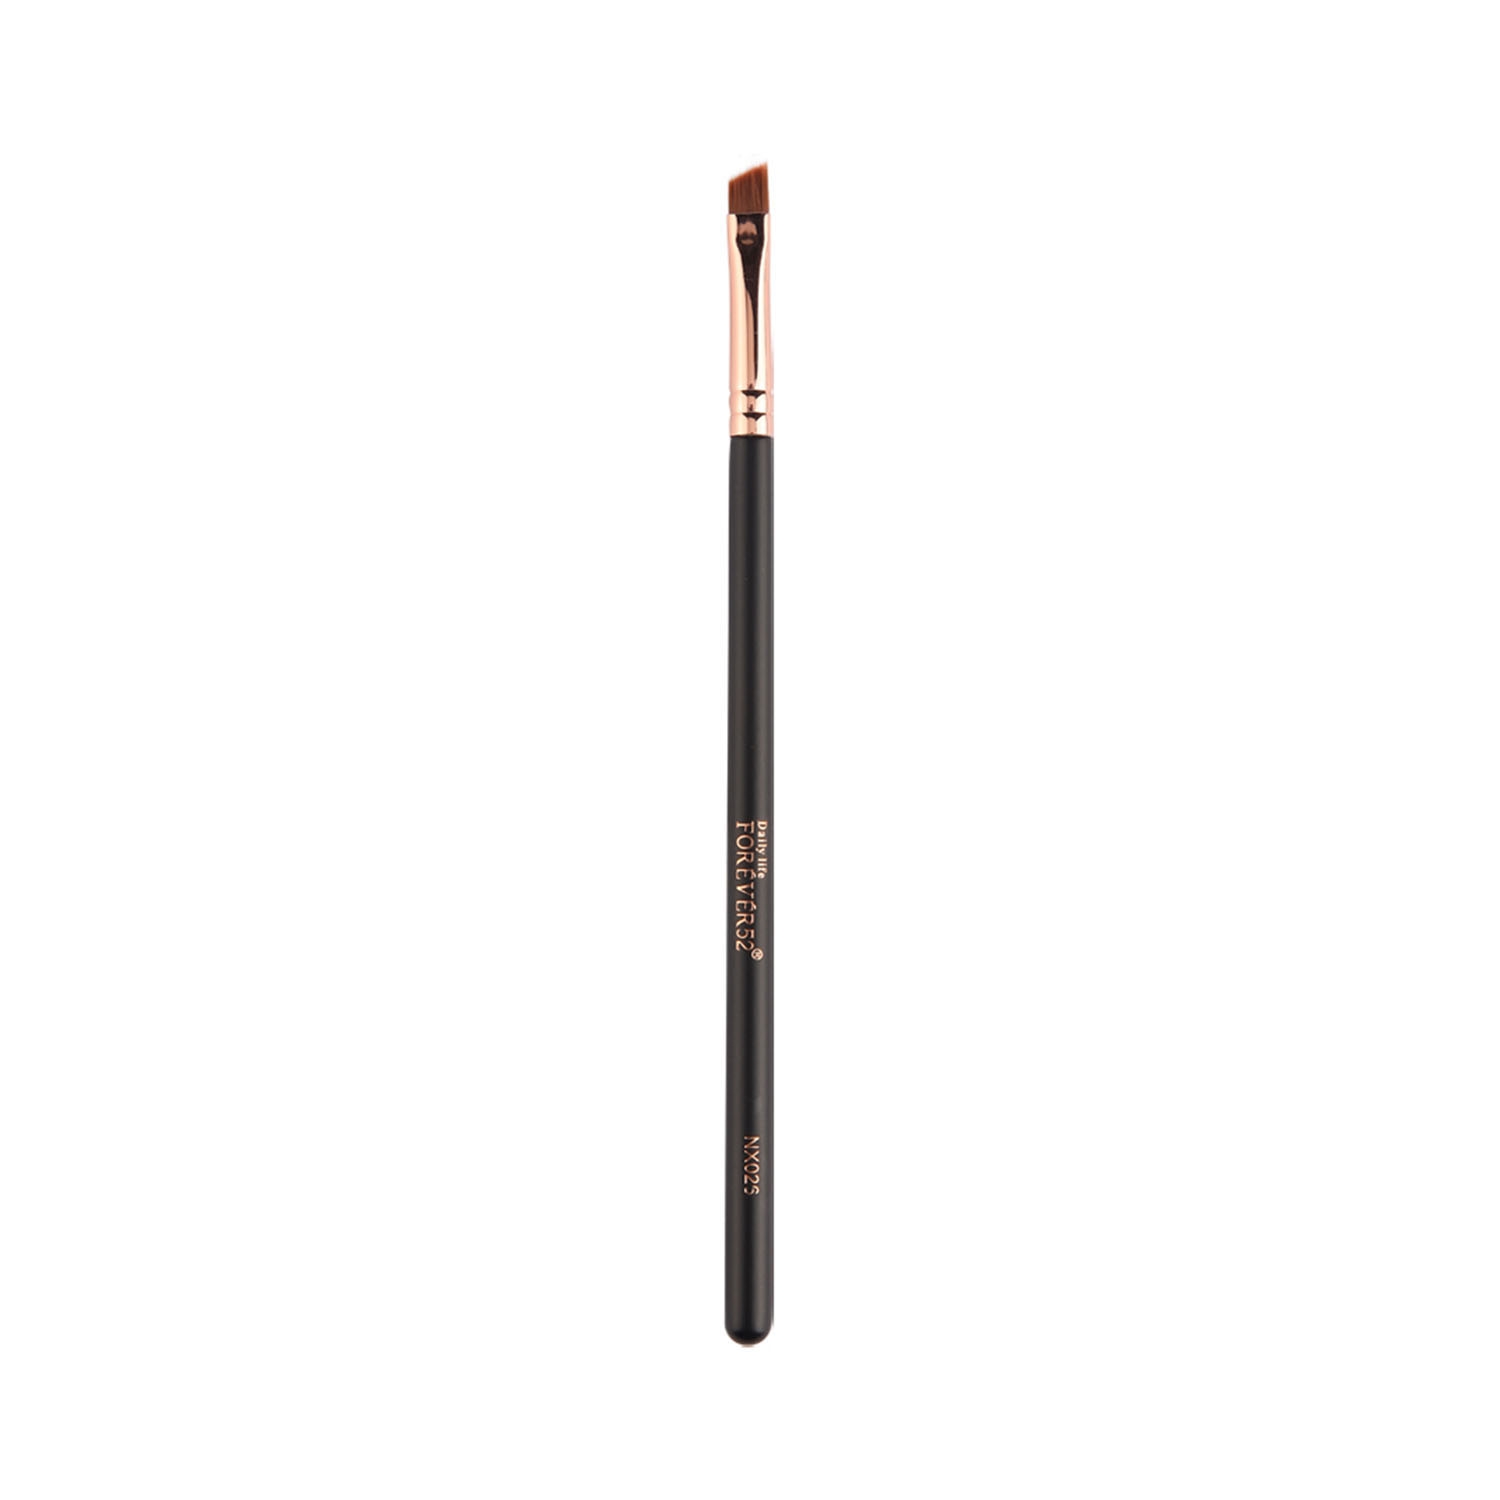 Daily Life Forever52 | Daily Life Forever52 Eye Brow Brush - NX025 (1Pc)